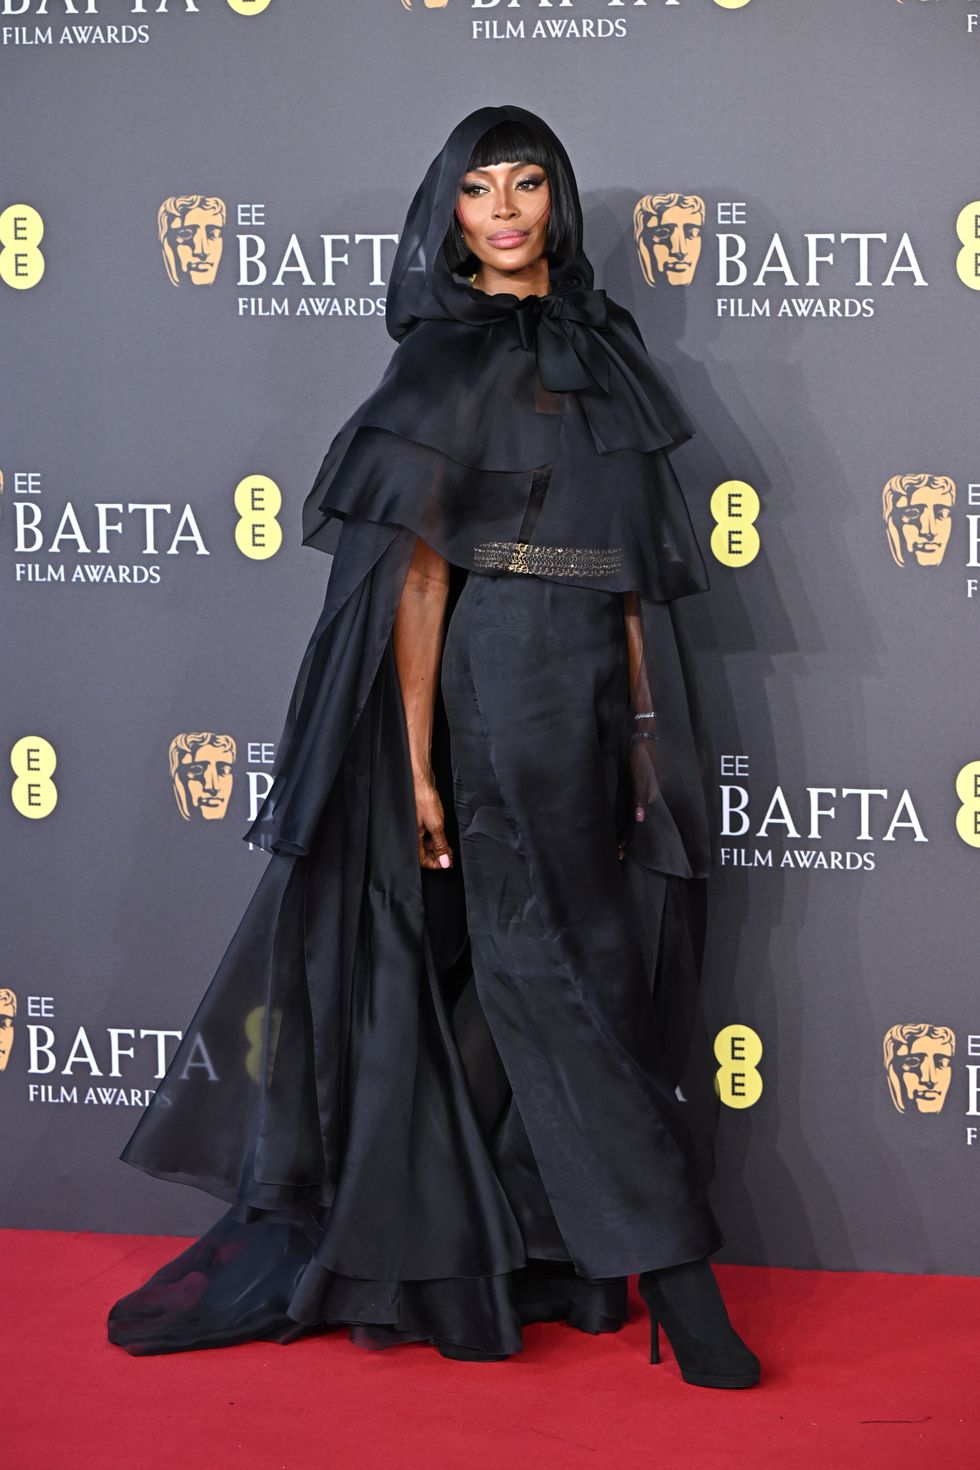 london, england february 18 naomi campbell attends the 2024 ee bafta film awards at the royal festival hall on february 18, 2024 in london, england photo by stephane cardinale corbiscorbis via getty images